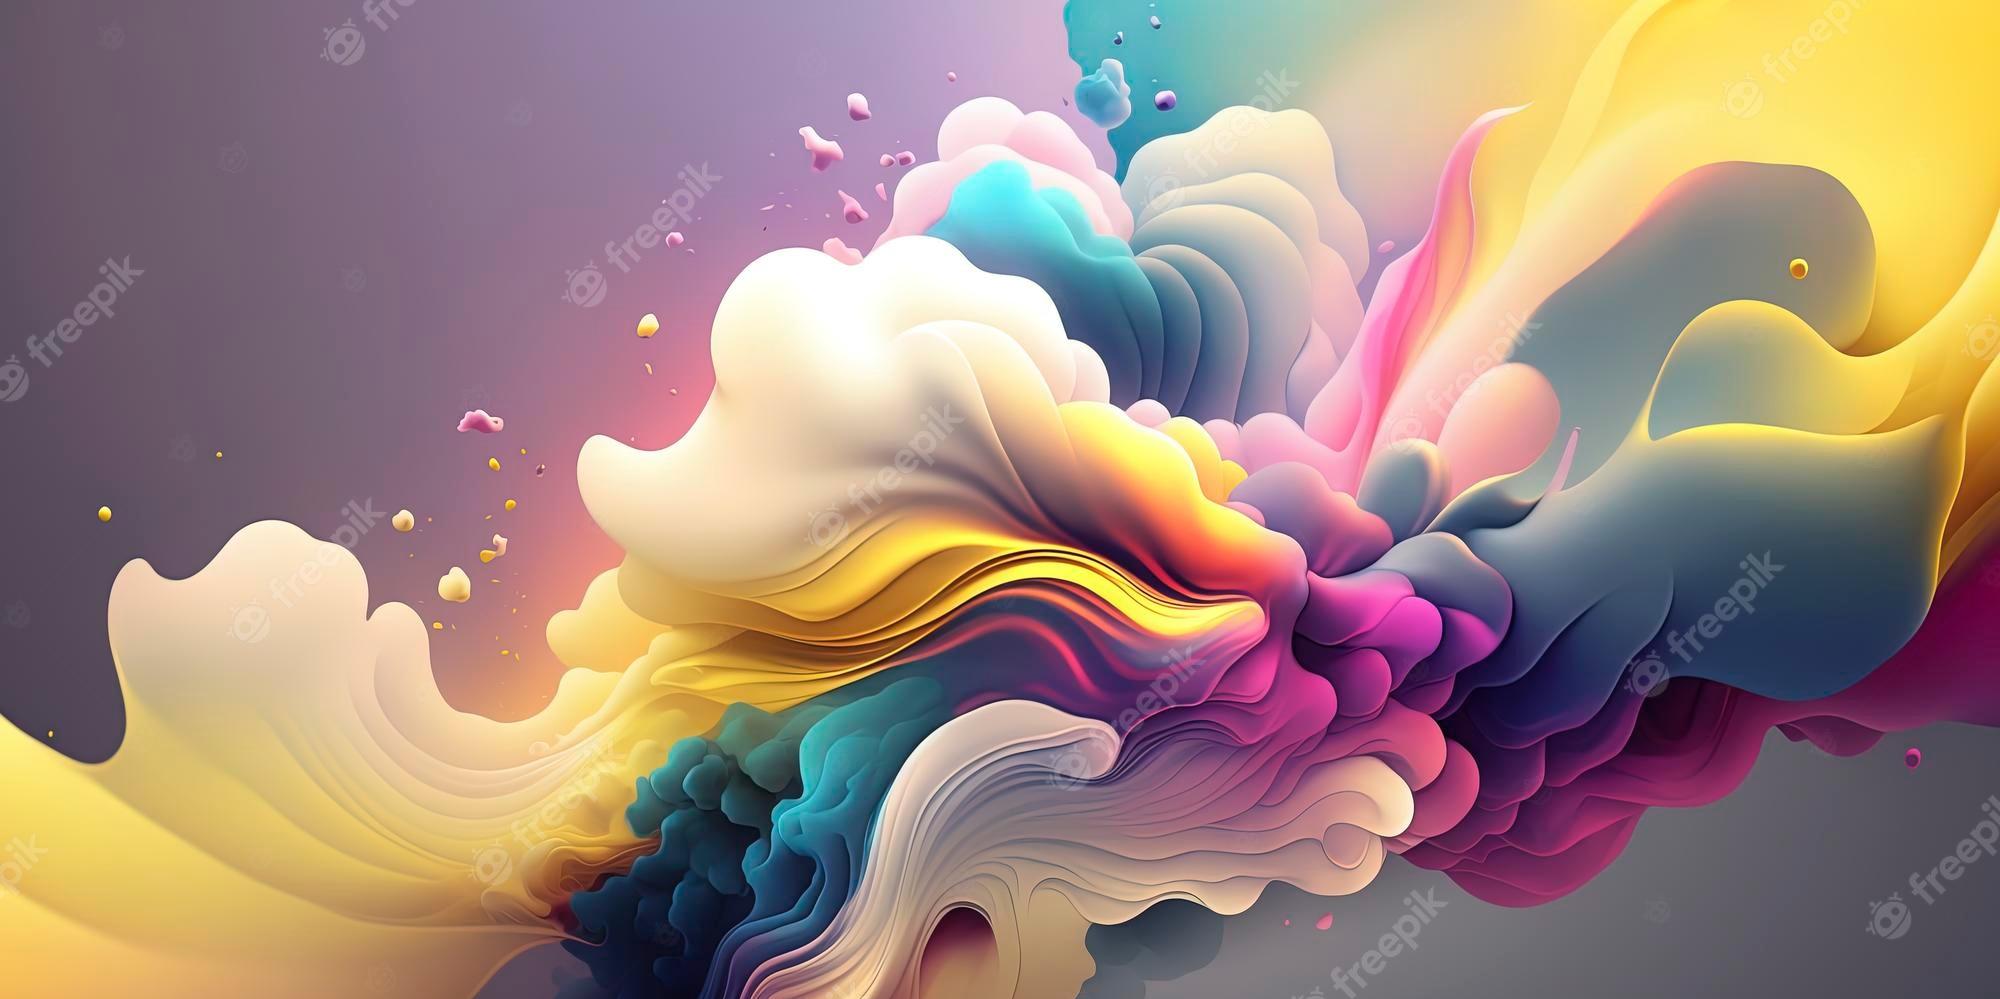 Premium Photo 4k Abstract Wallpaper With Soft Colors